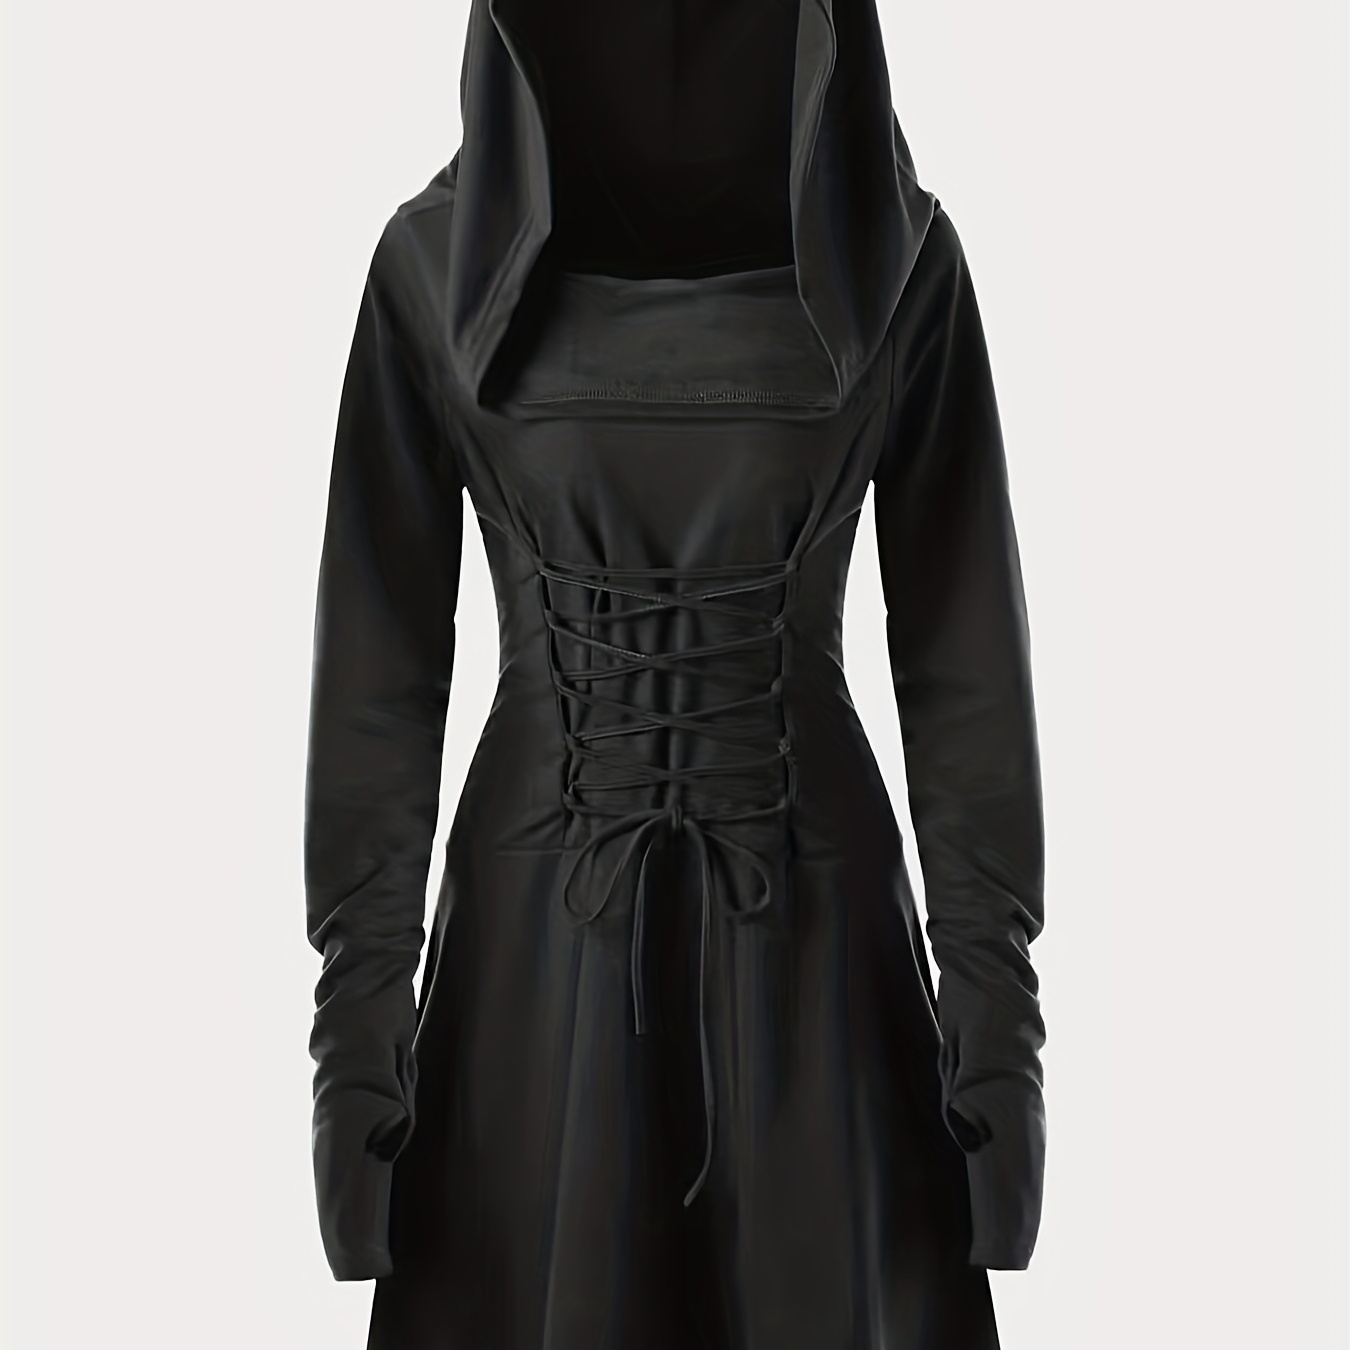 

Gothic Hooded Cosplay Dress, Long Sleeve Dress For Halloween, Party, Performance, Women's Clothing